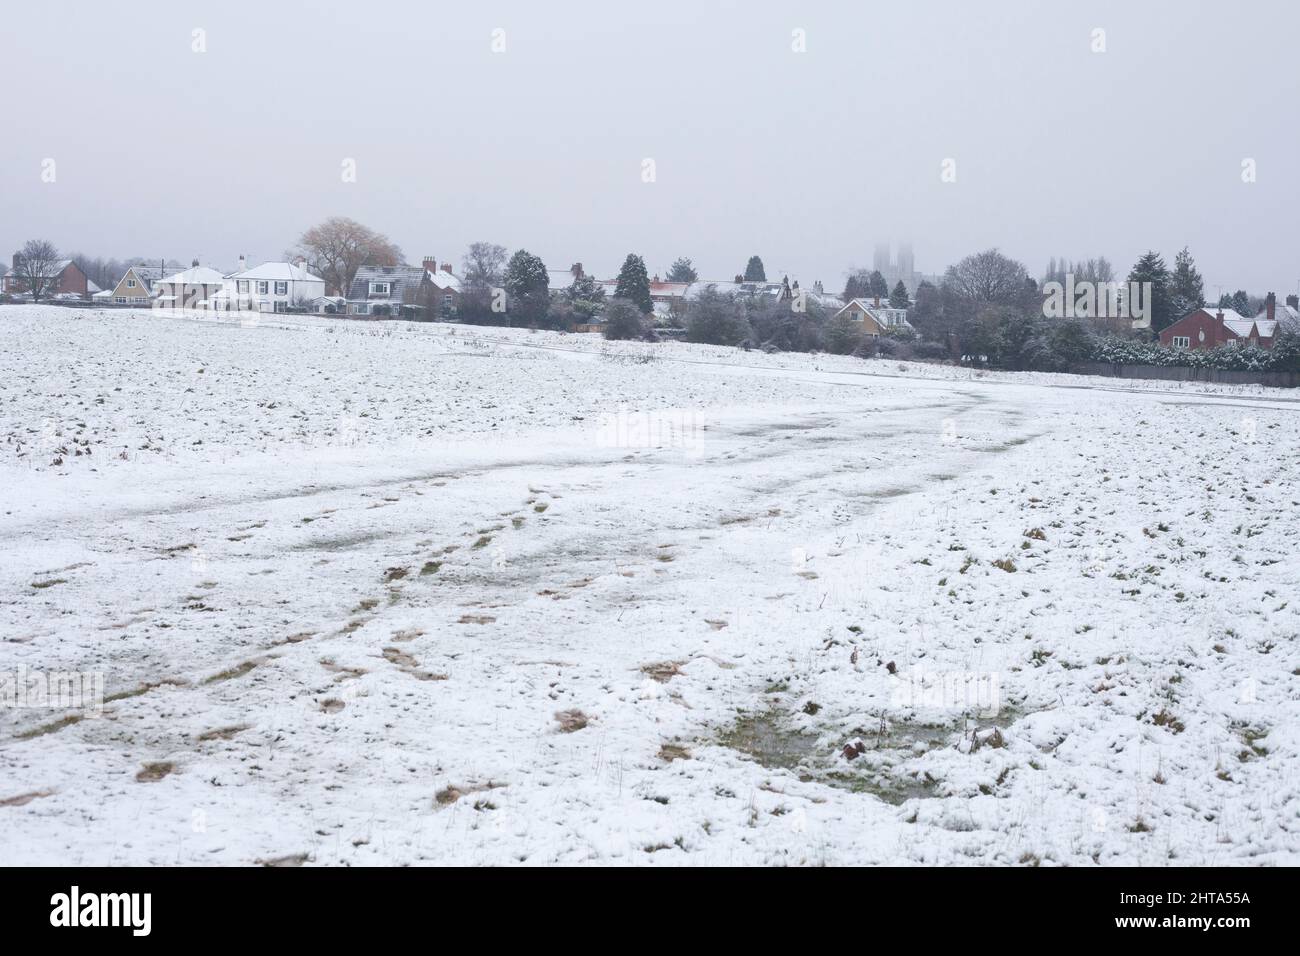 Snow in Beverley, East Yorkshire UK following storm Eunice February 2022 Stock Photo